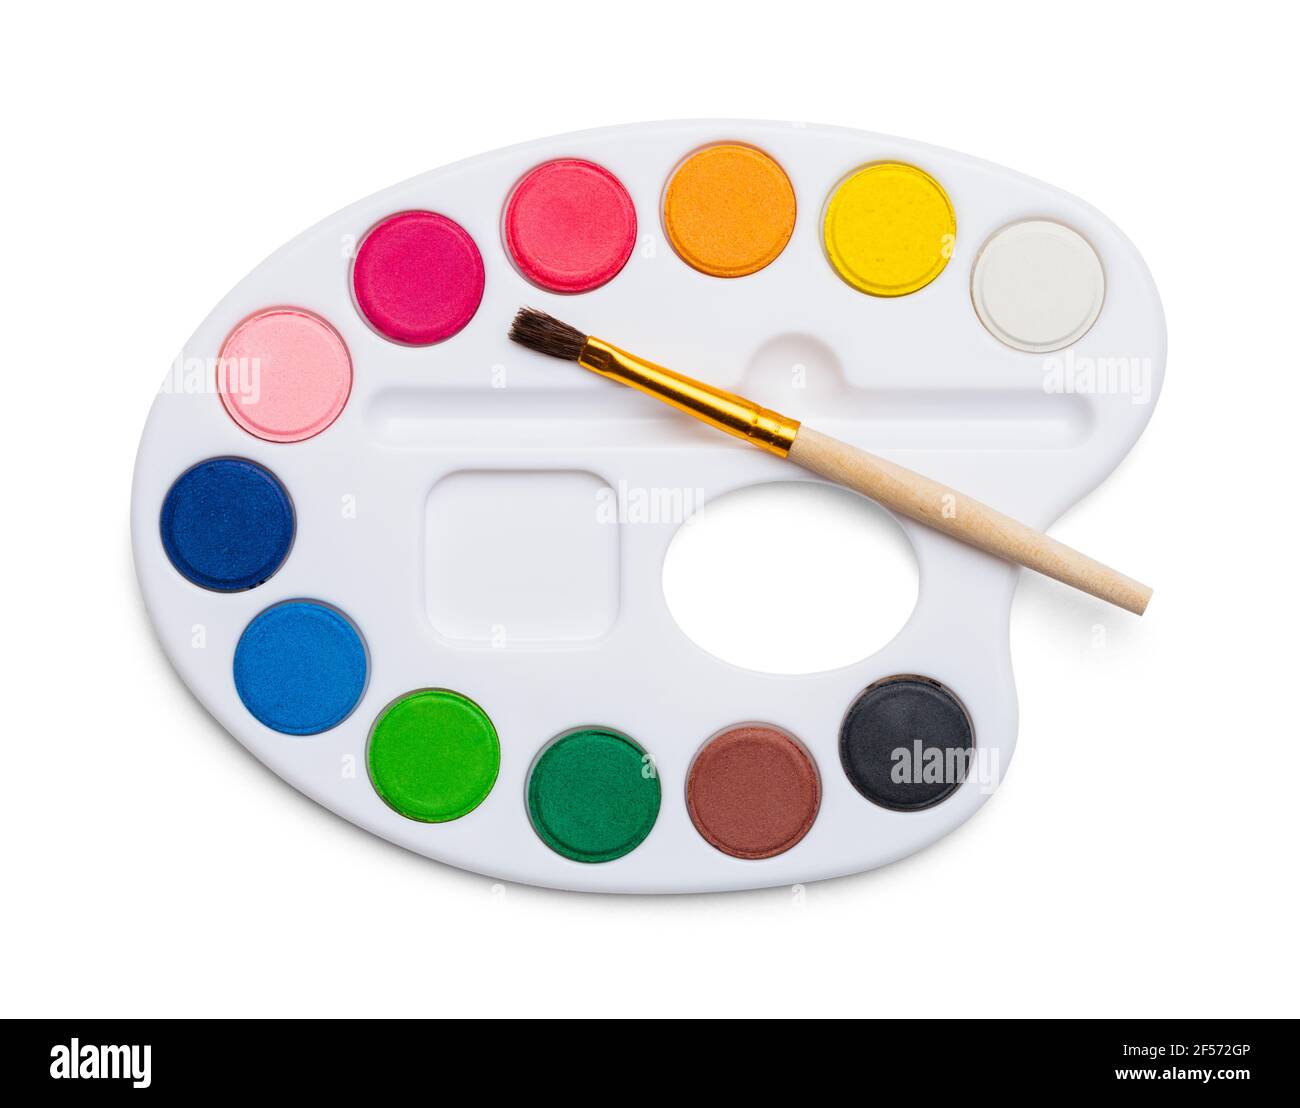 Small Watercolor Paint Palette with Brush Cut Out. Stock Photo